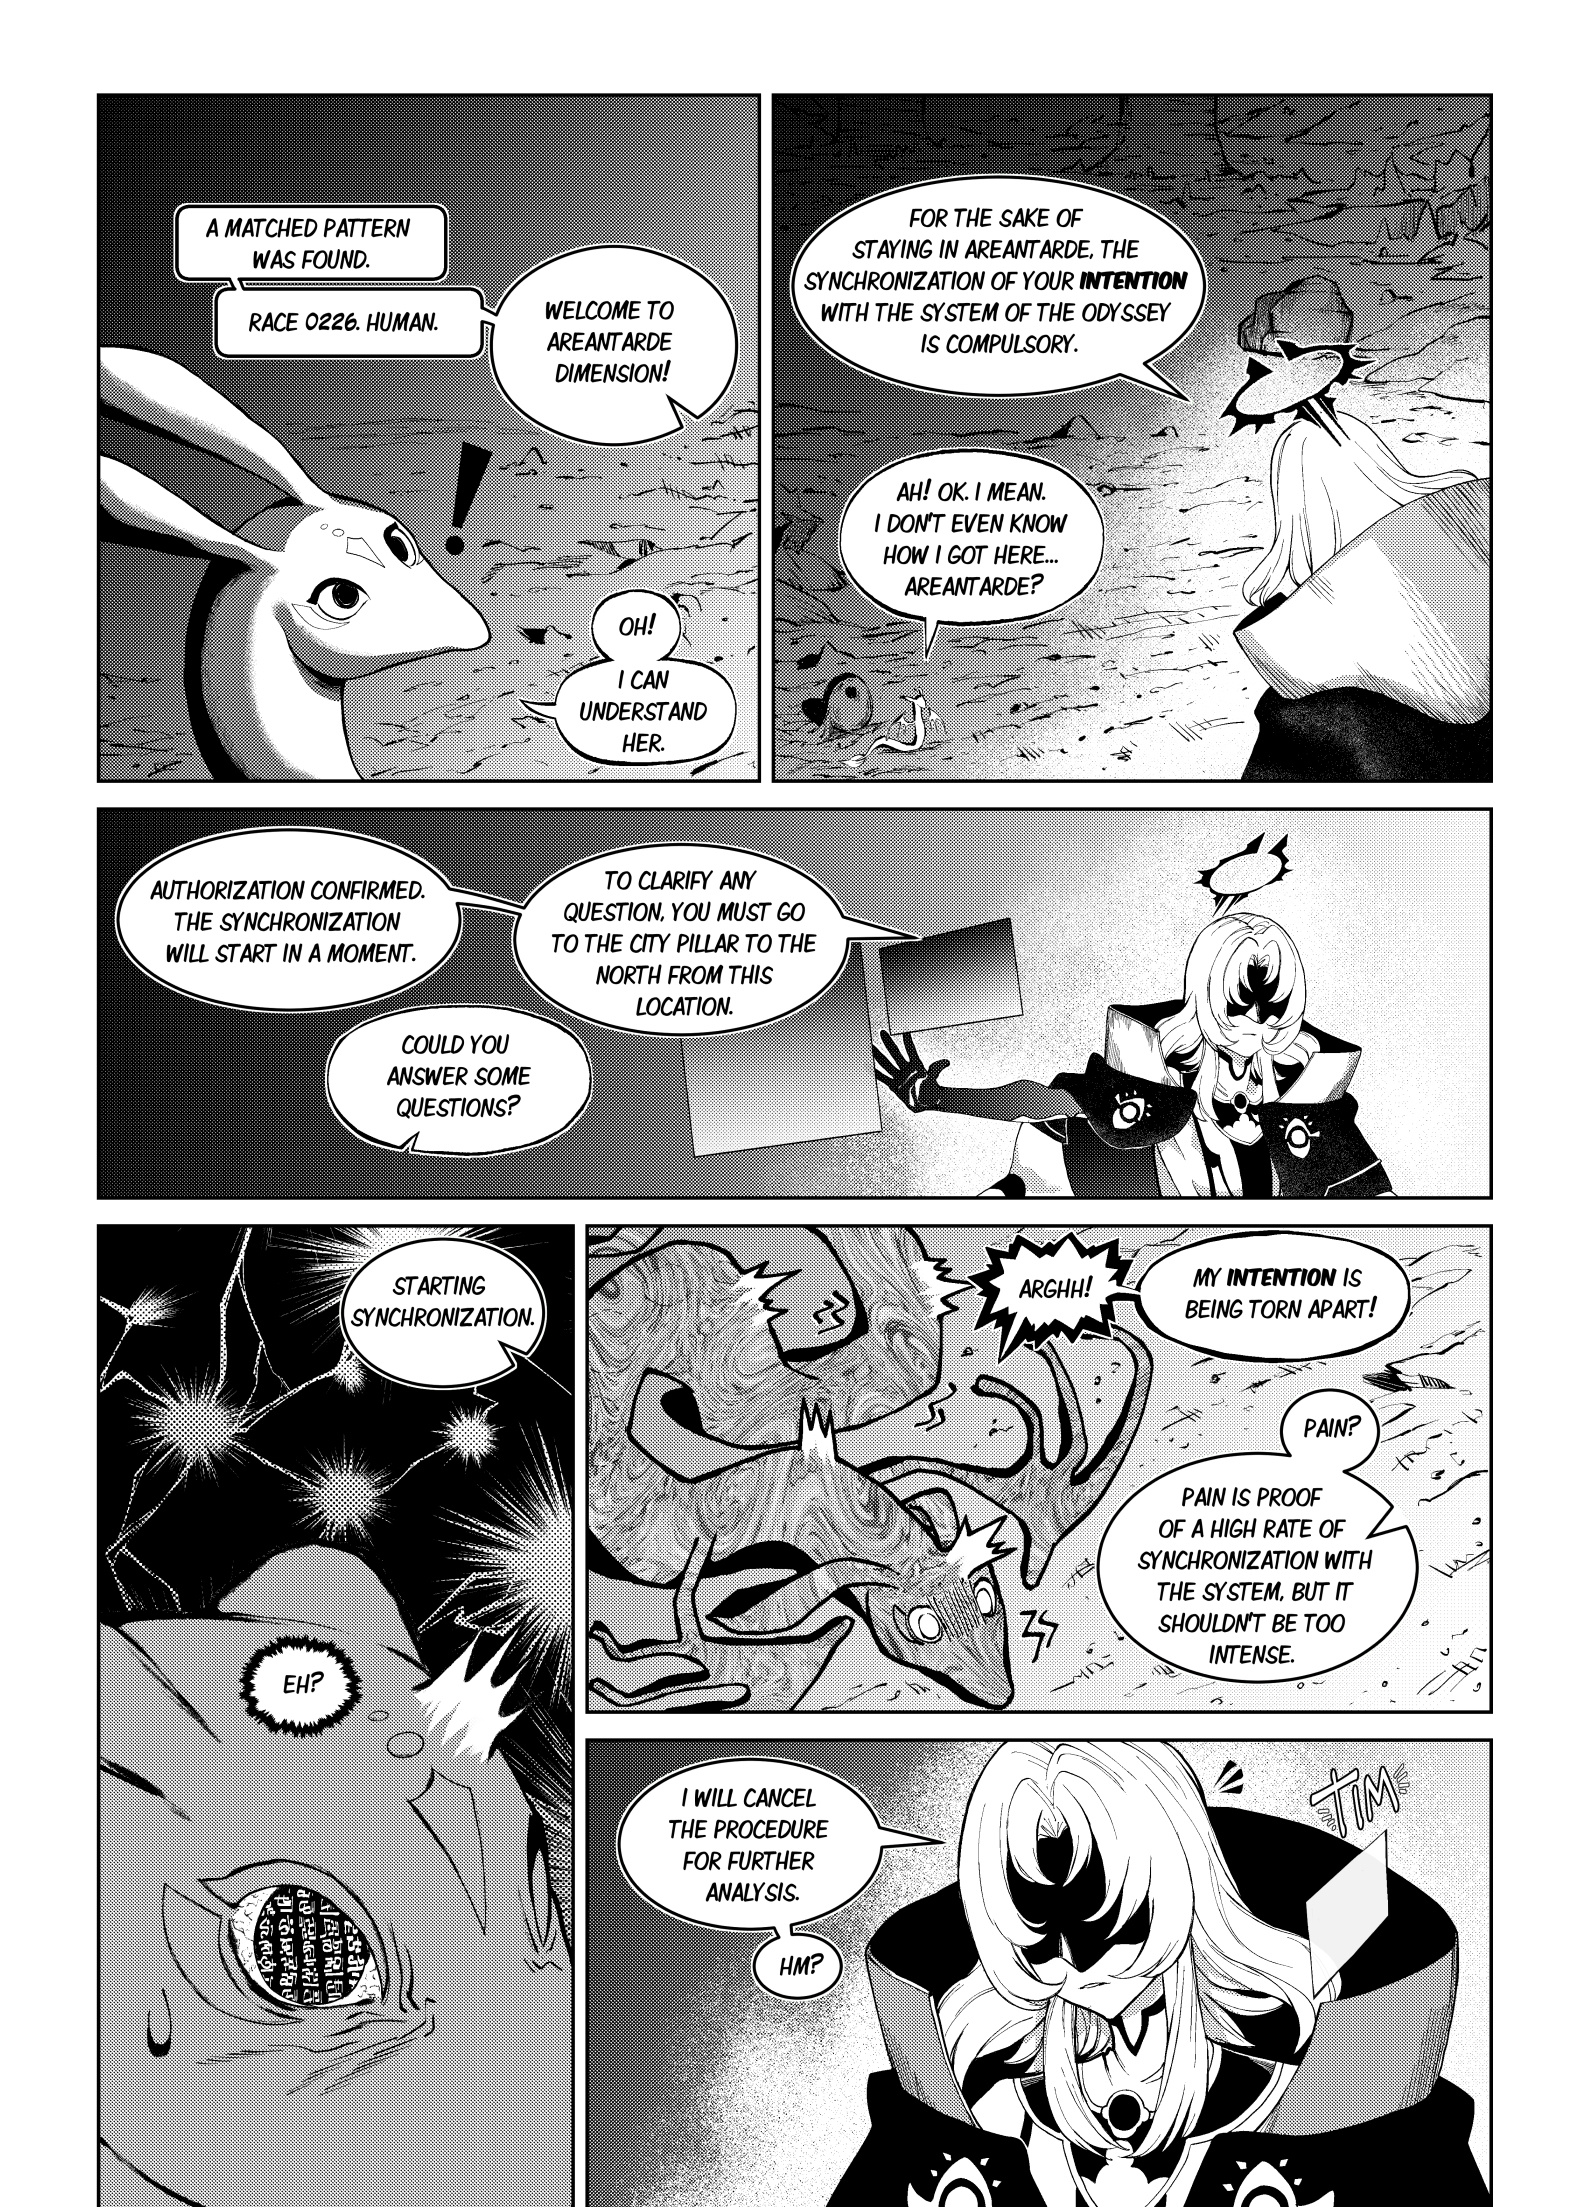 An Odyssey Beyond Dimensions - Page 2